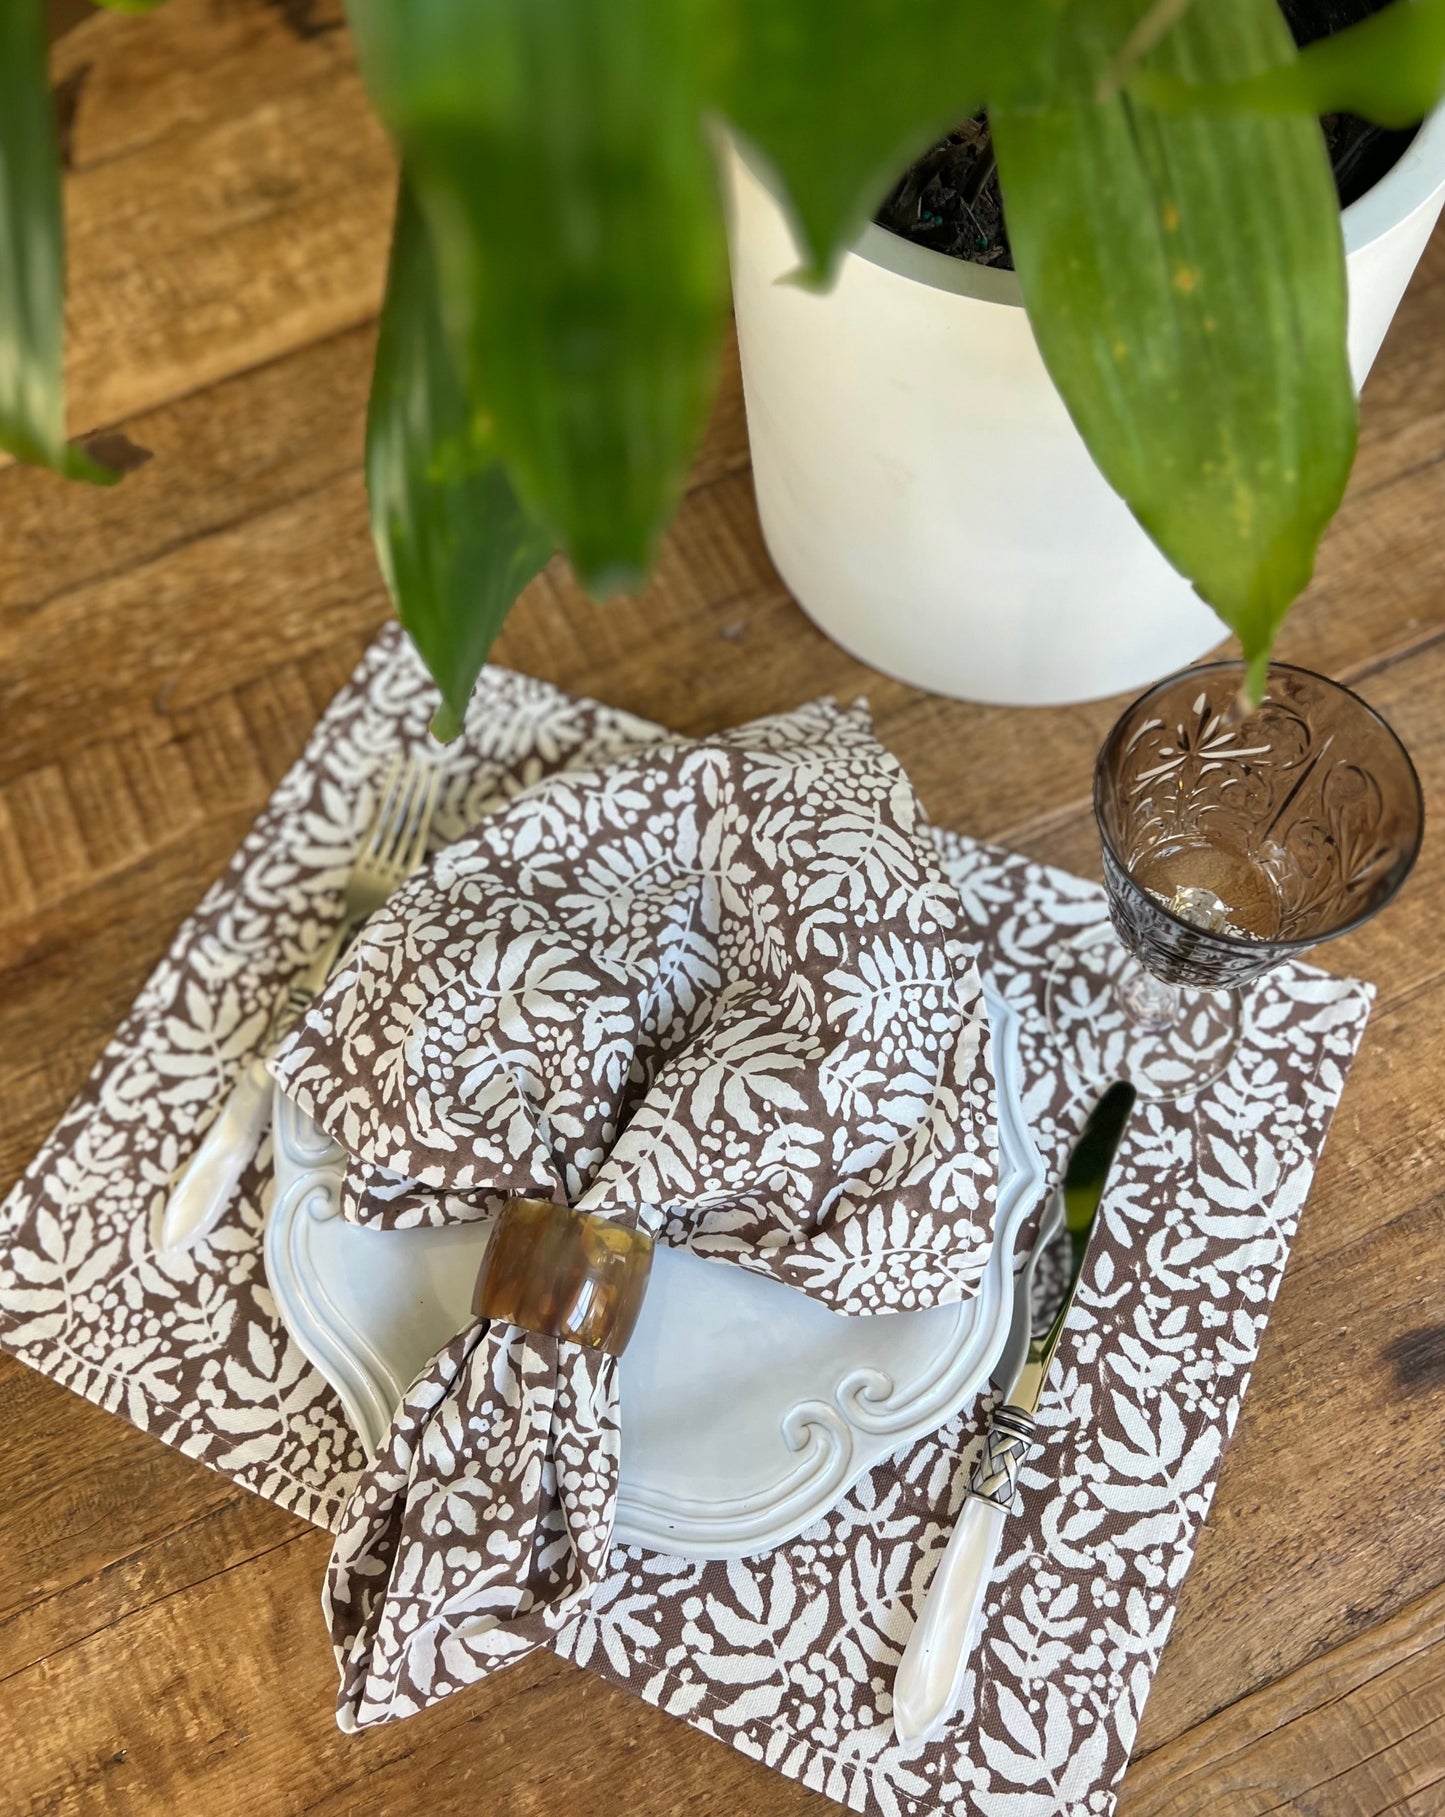 Gathered Garden Placemats in Saddle Brown - Set of 4